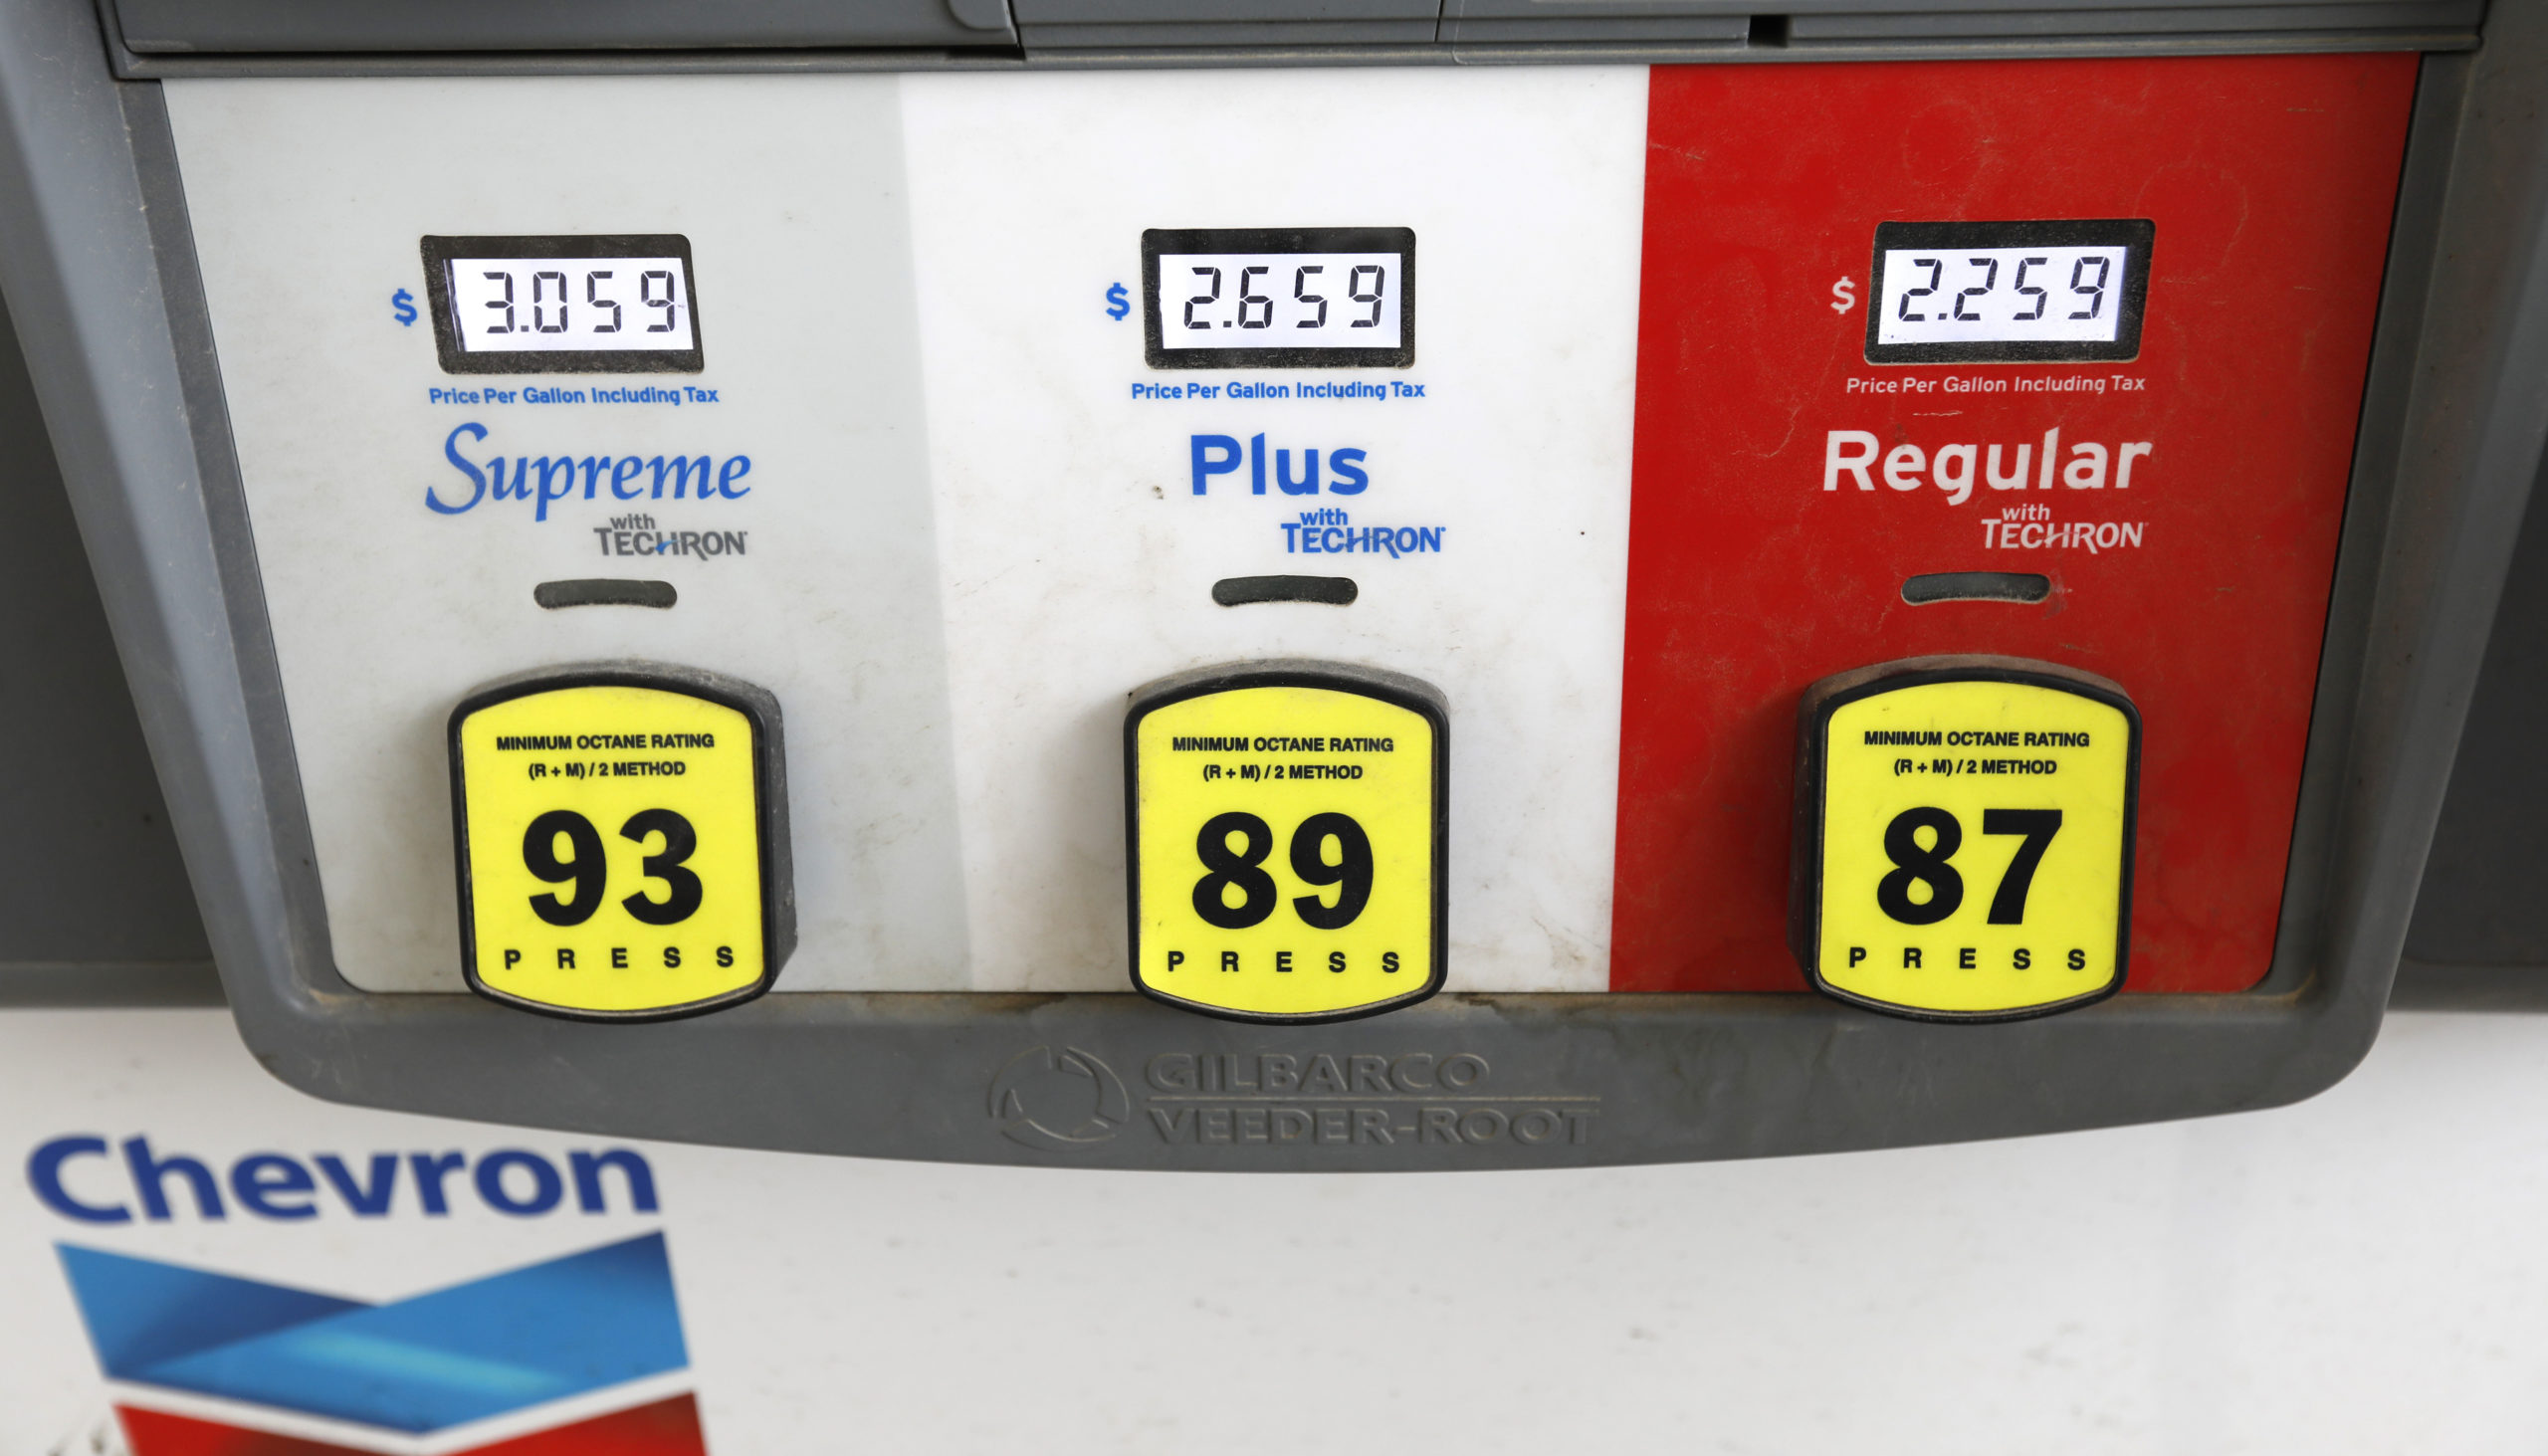 AAA said premium gas is a waste for cars that require regular gas....